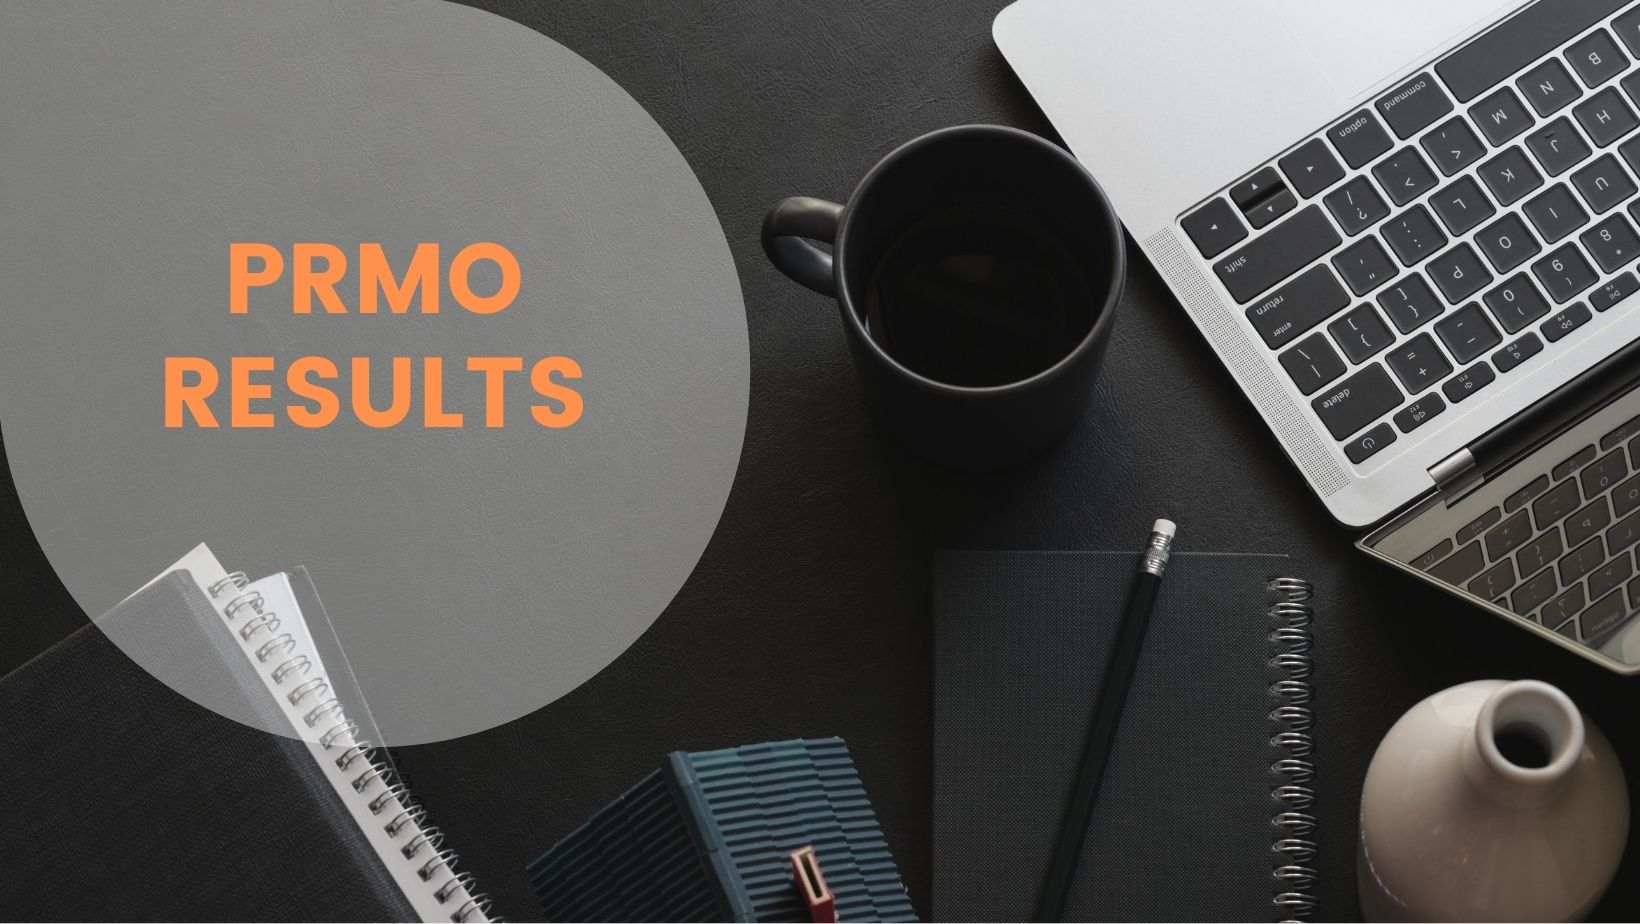 PRMO Result Featured Image